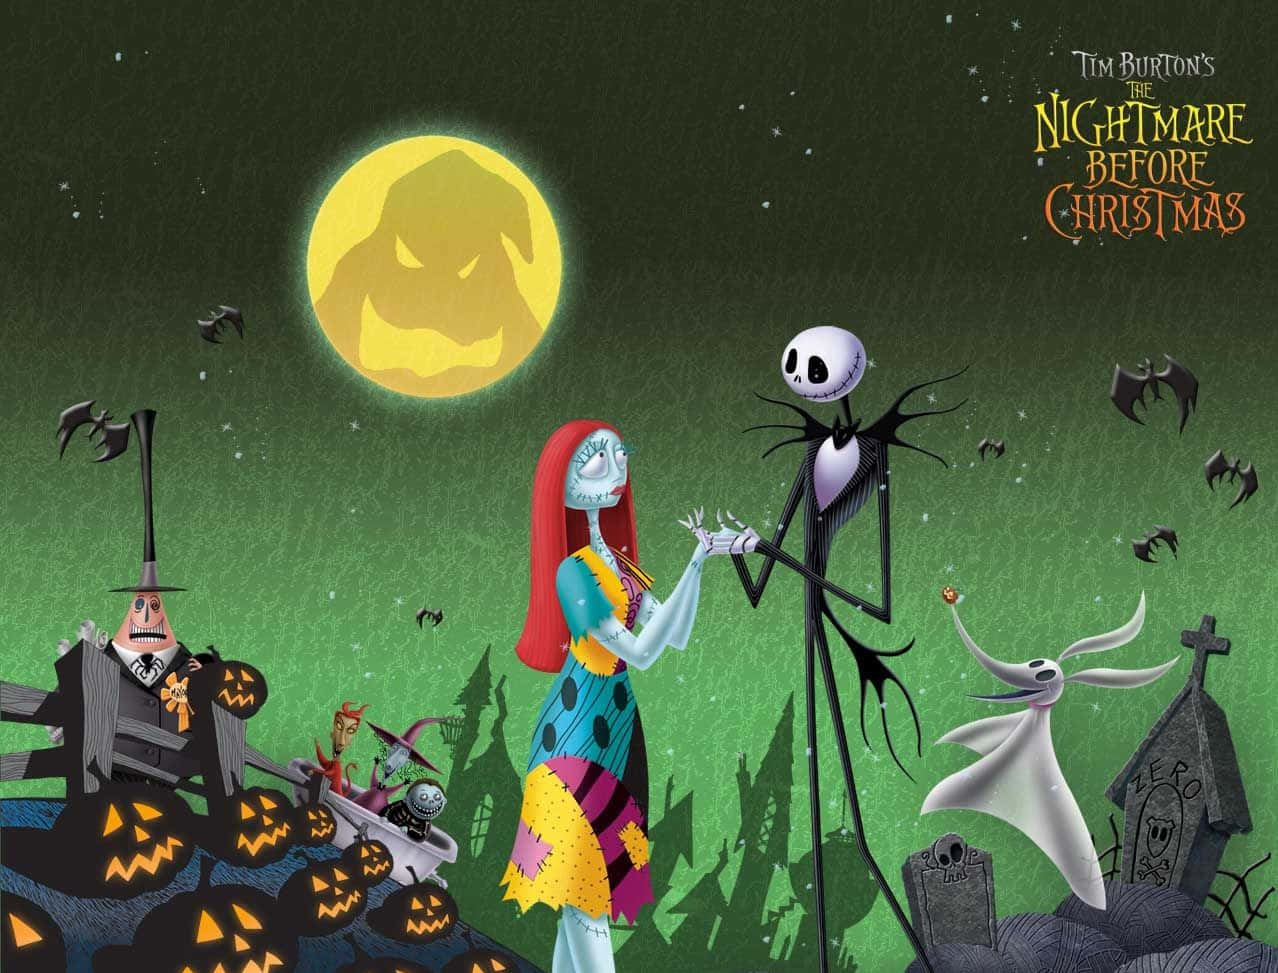 Jack Skellington, the Pumpkin King, from The Nightmare Before Christmas